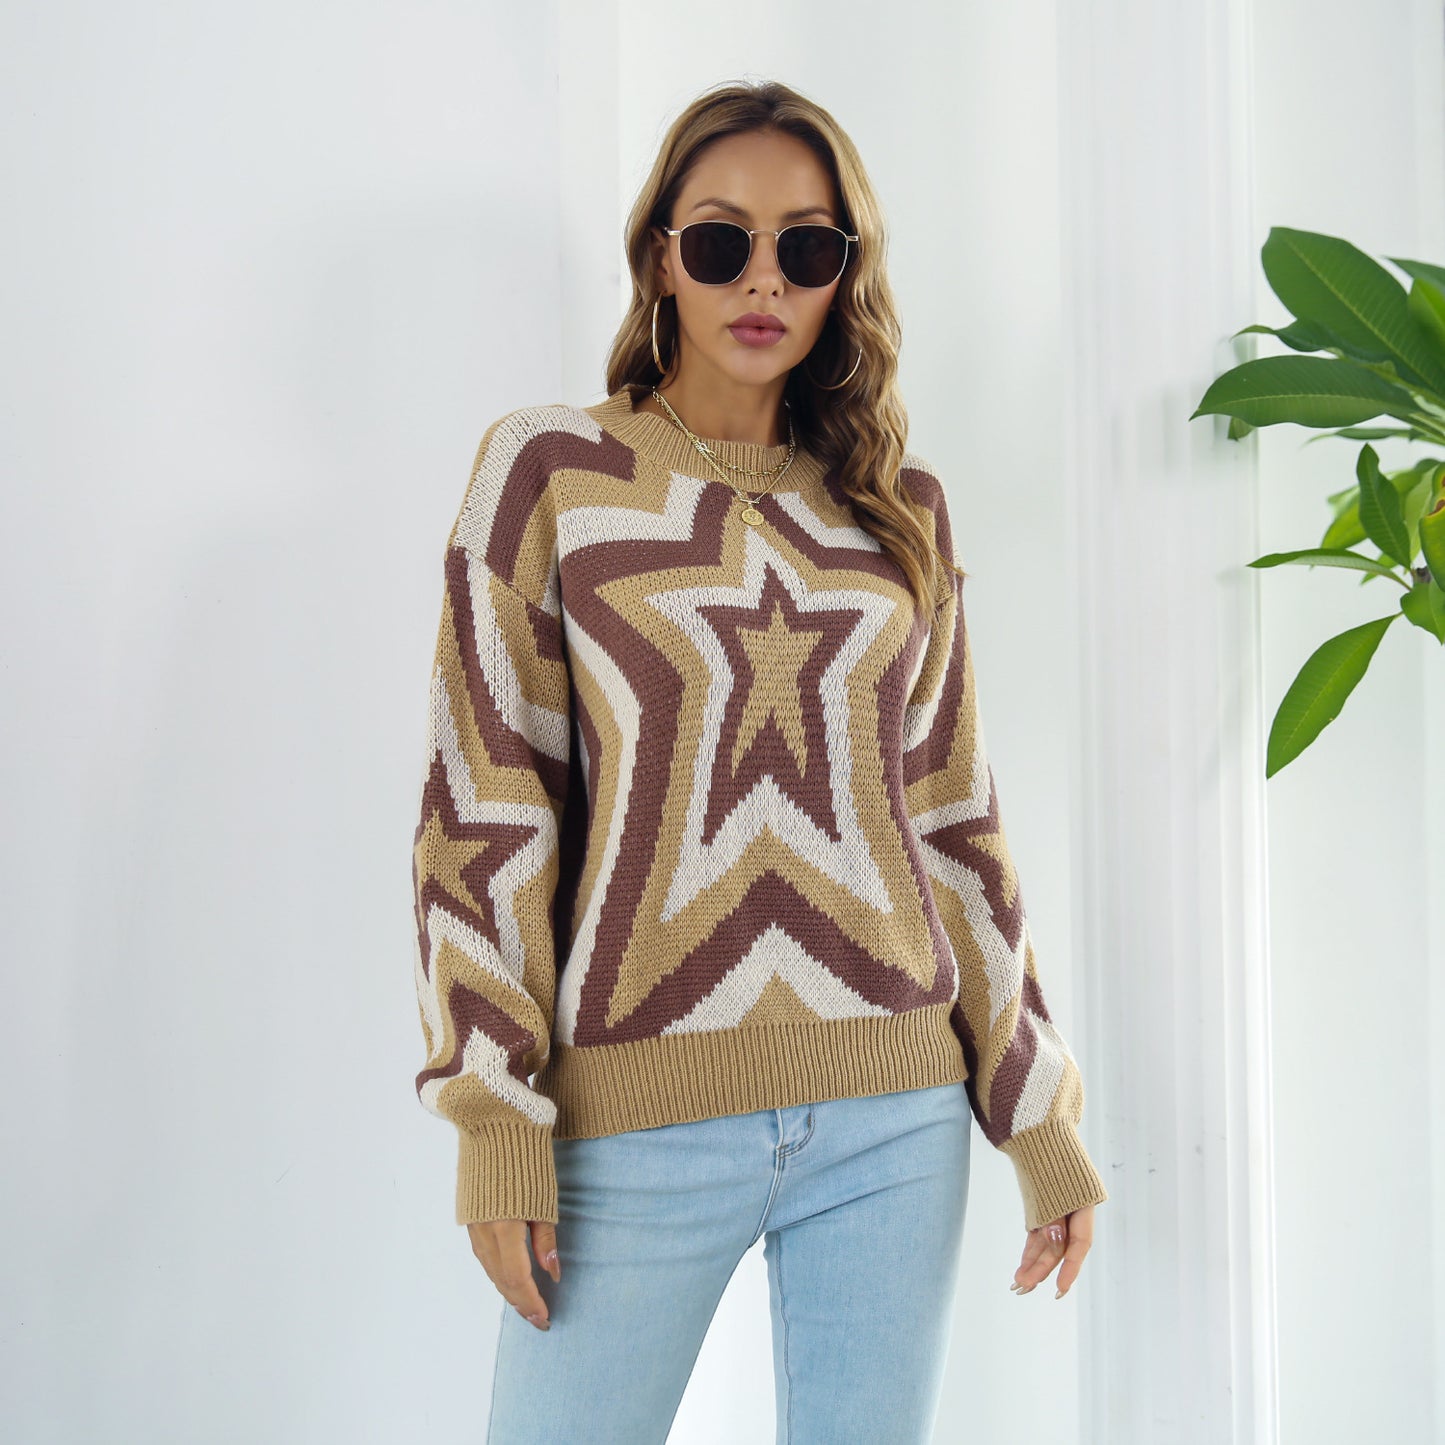 Psychic Star Layered Knit Sweater in Blue or Orange